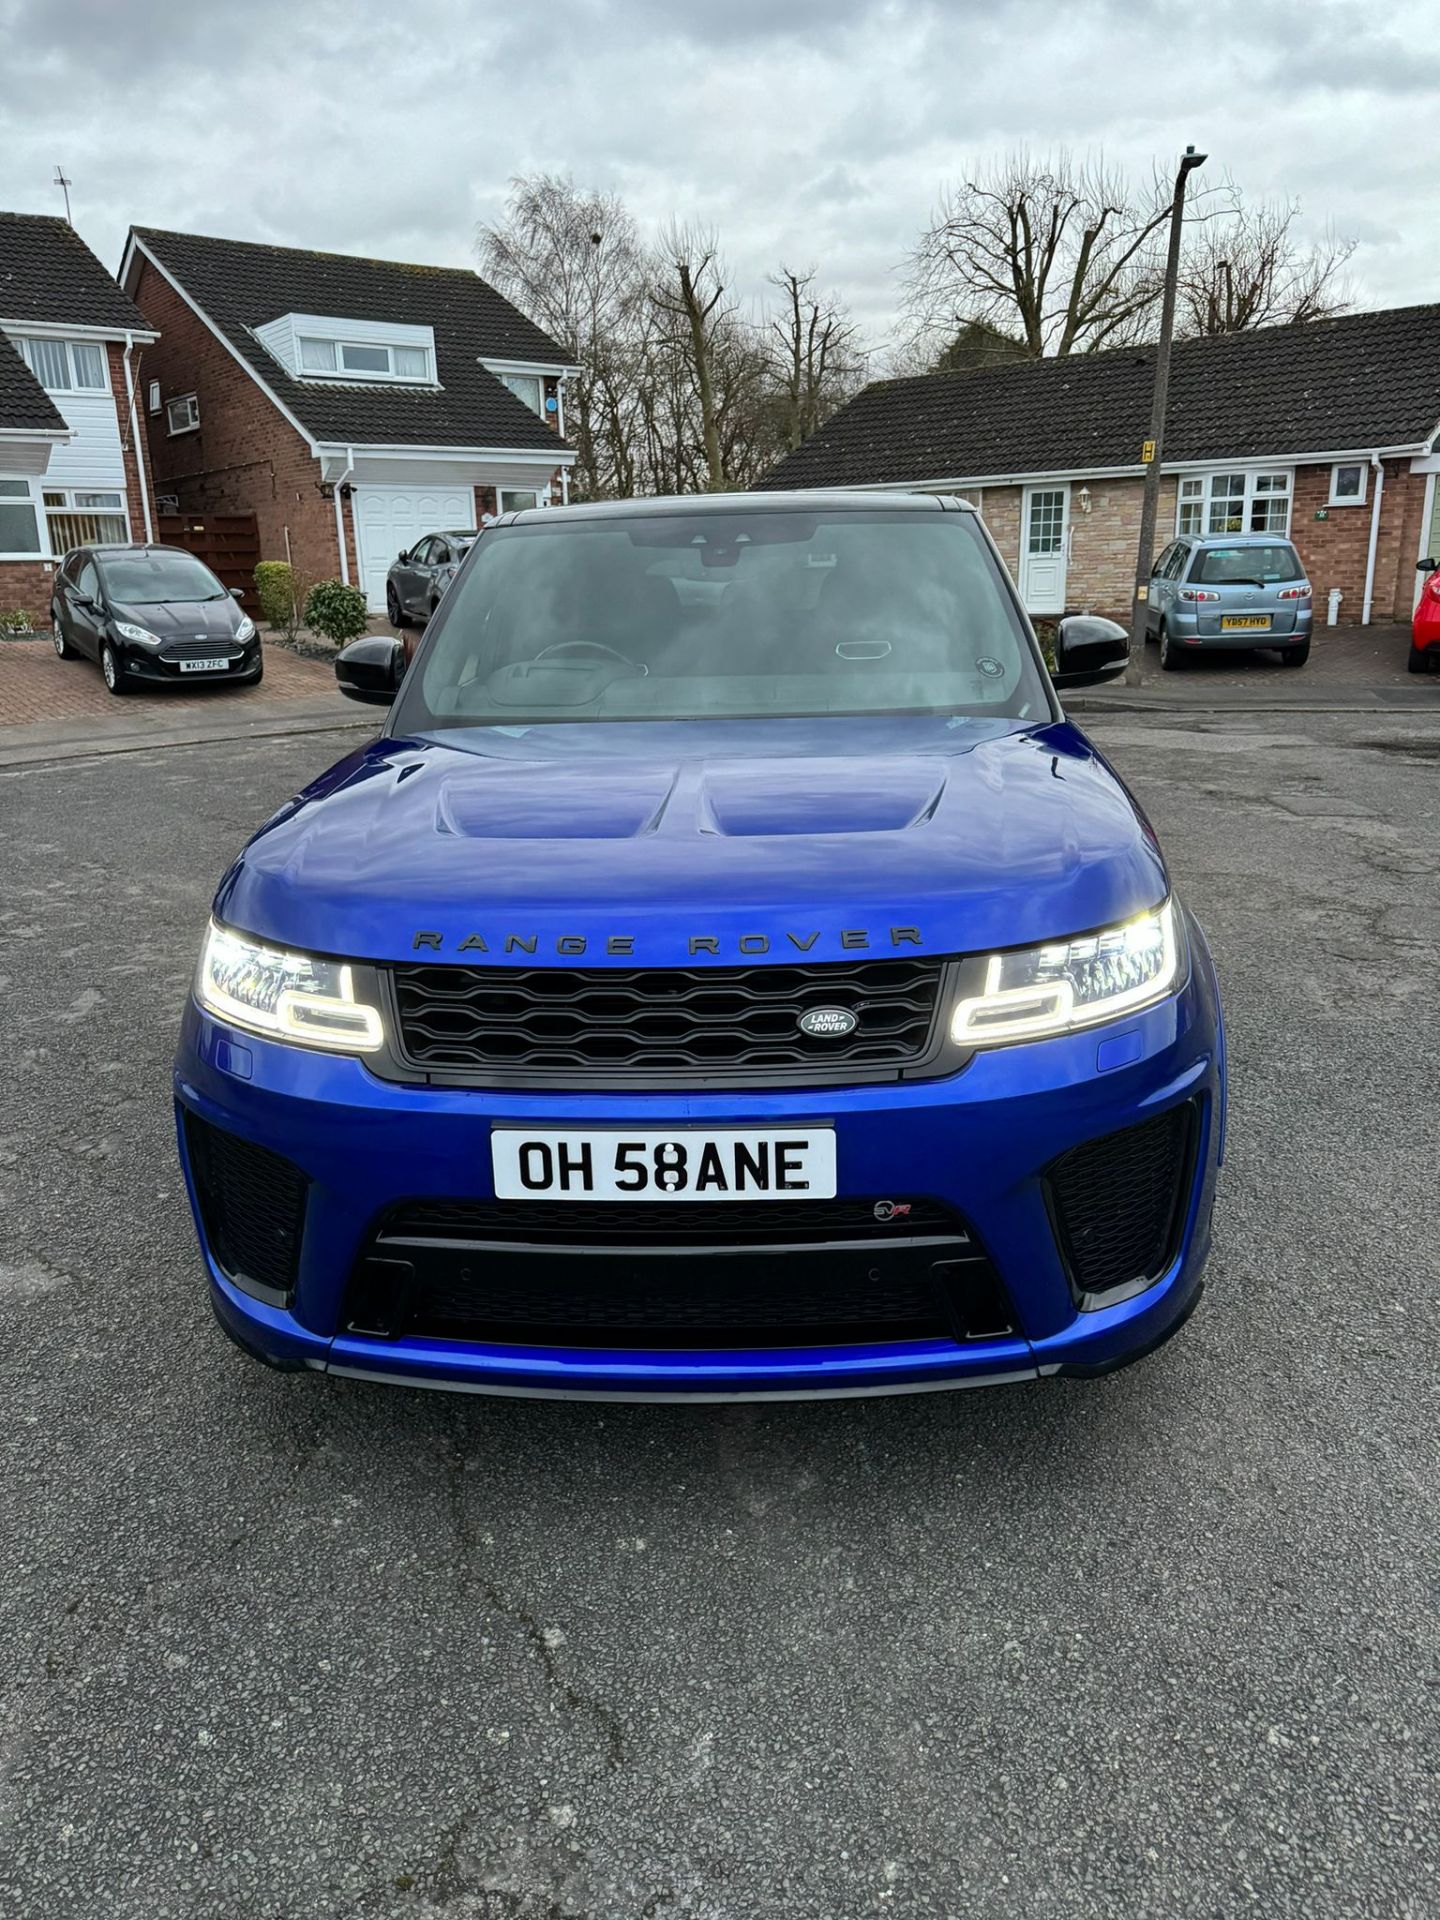 2018 18 RANGE ROVER SVR - 62K MILES WITH FULL LAND ROVER HISTORY - EXTREMELY CLEAN EXAMPLE. - Bild 5 aus 10